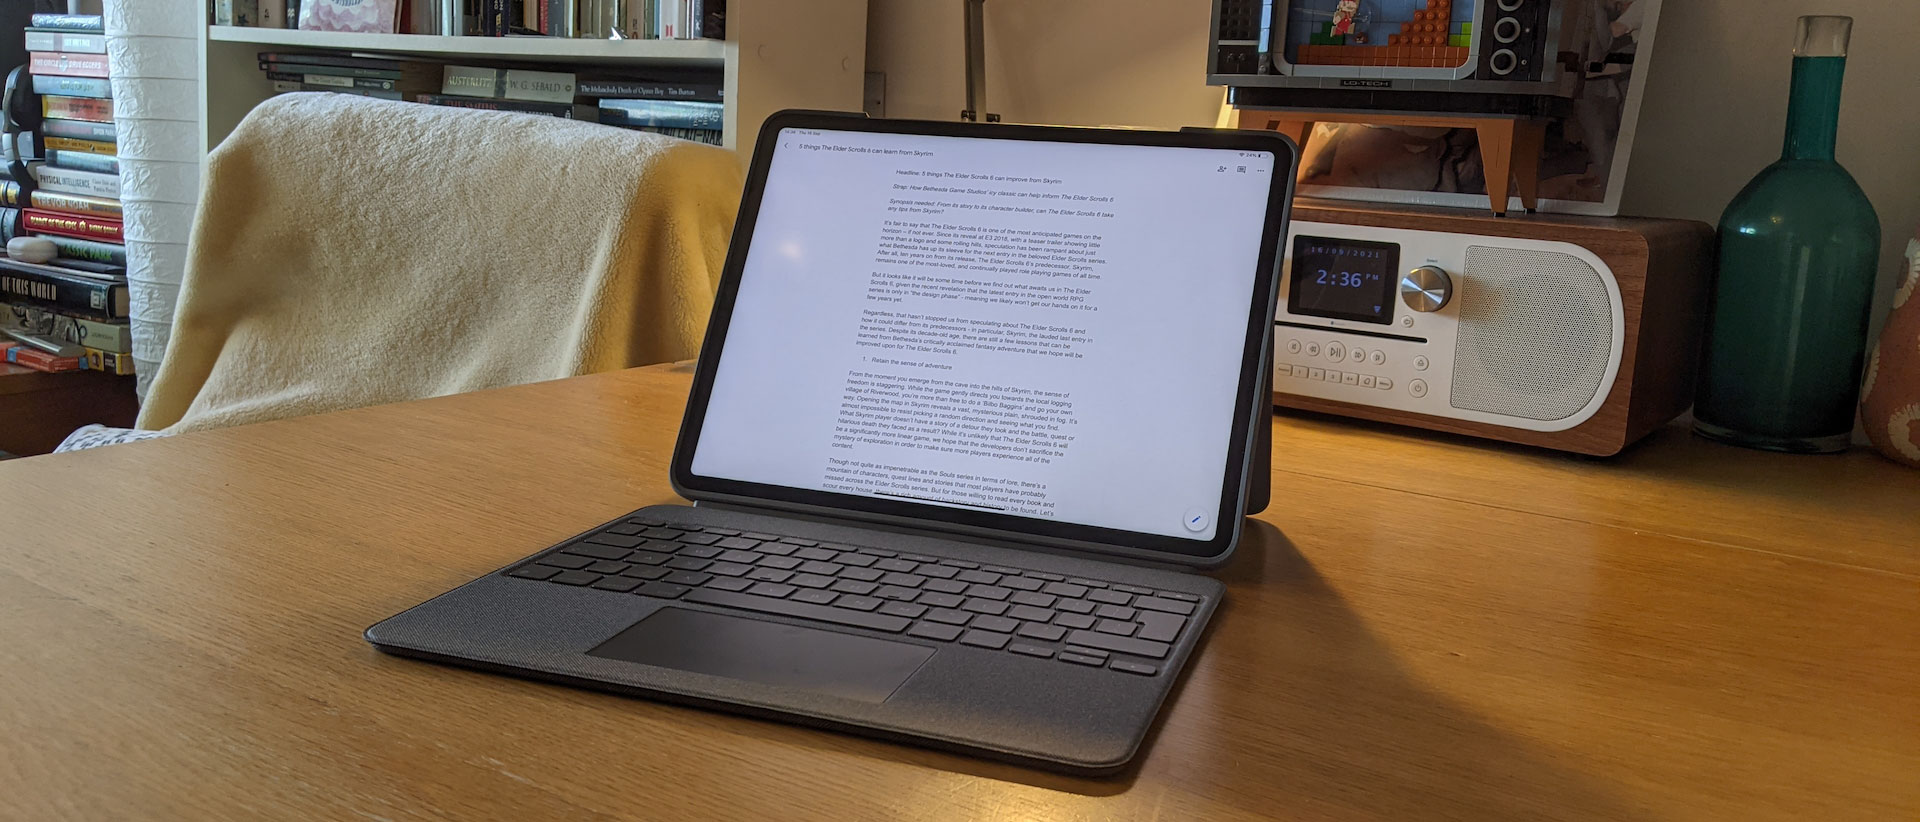 Review: Logitech Combo Touch is a Capable iPad Keyboard- The Mac